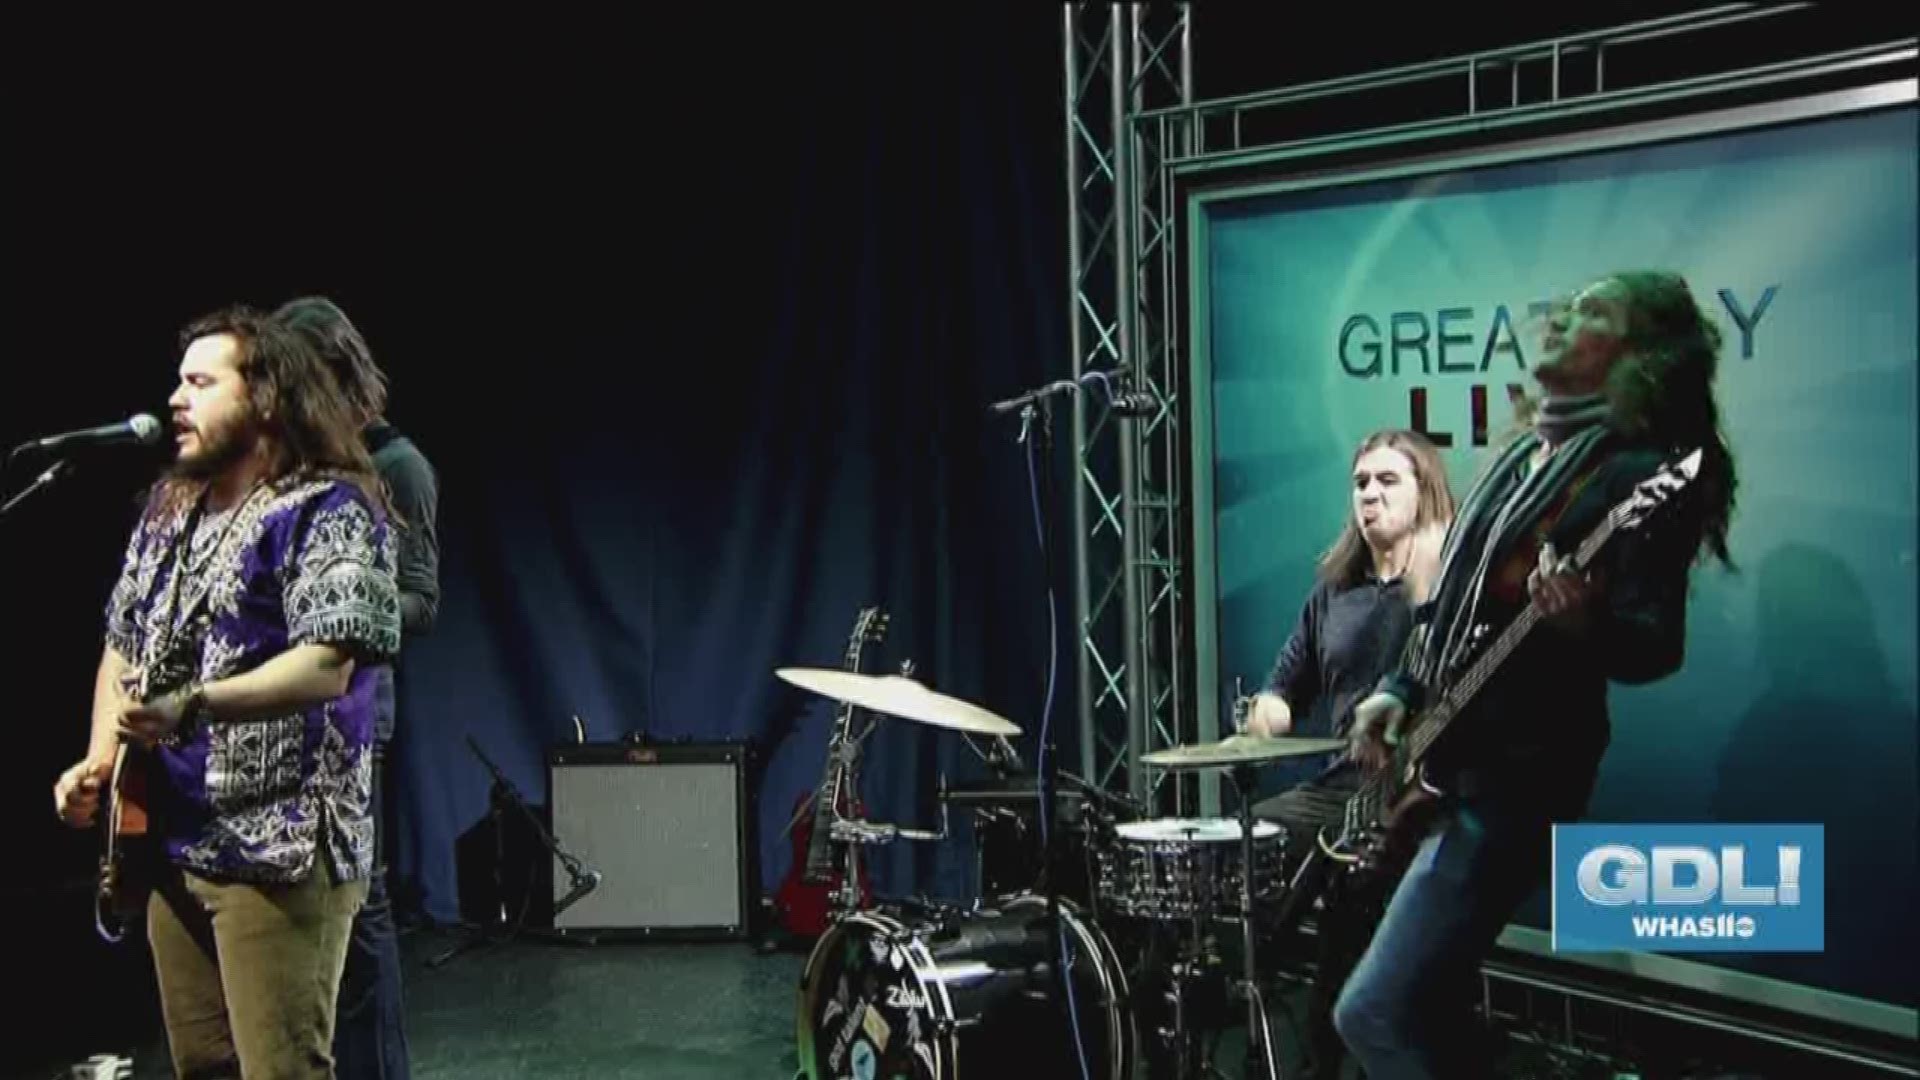 The band MOJOTHUNDER stopped by Great Day Live to perform and talk about their new single.